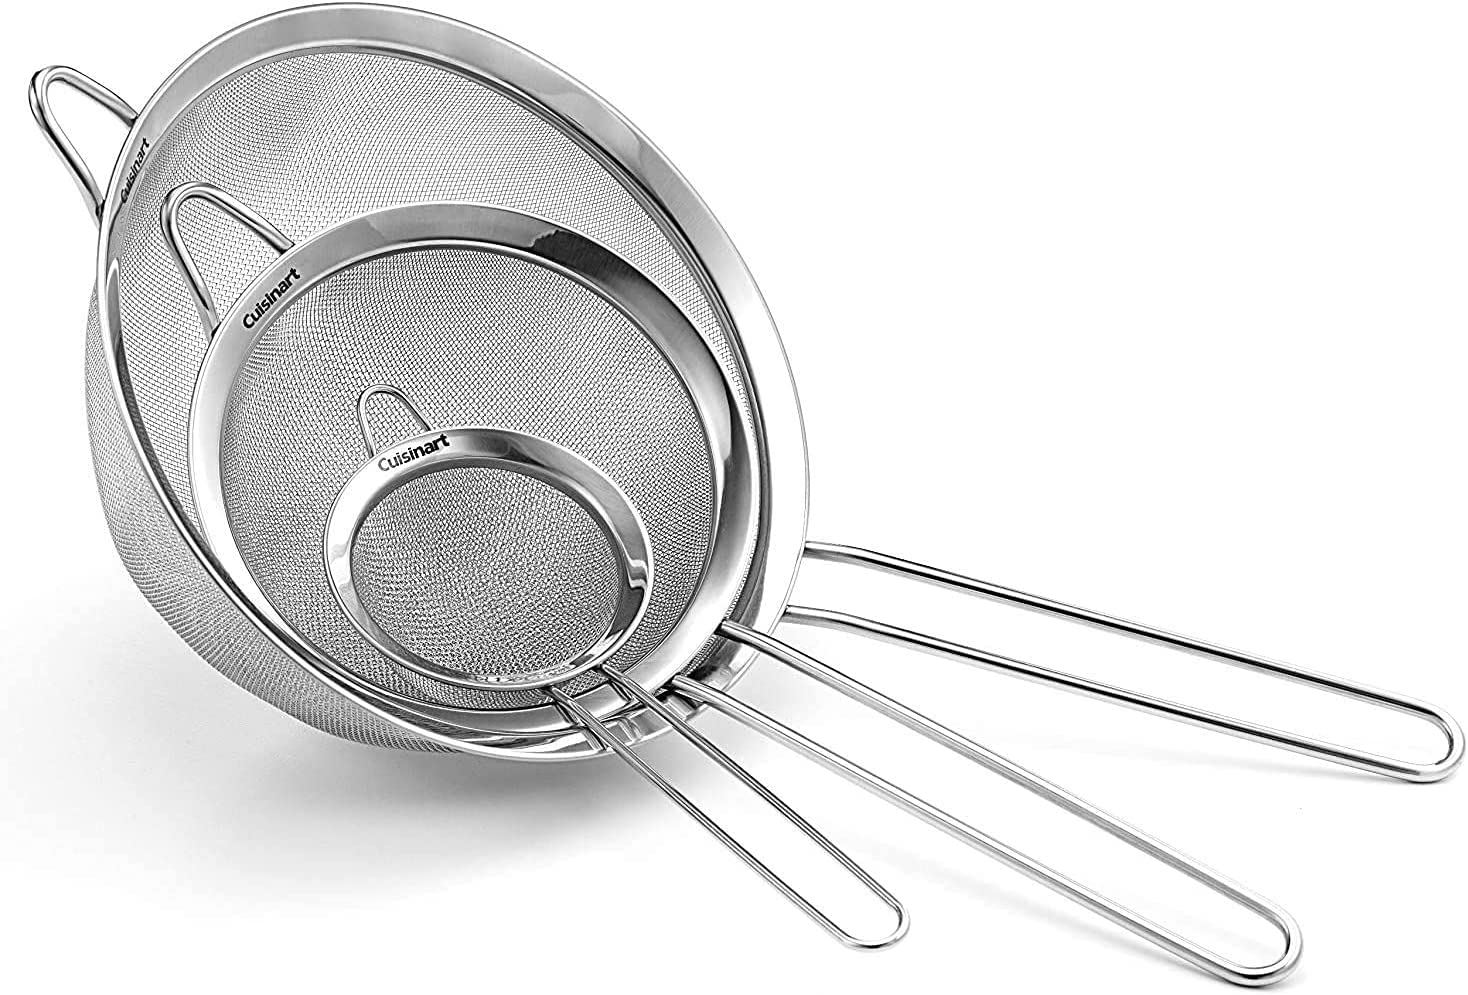 Cuisinart CTG-00-3MS Set of 3 Fine Set of Mesh Strainers, 1, Stainless Steel